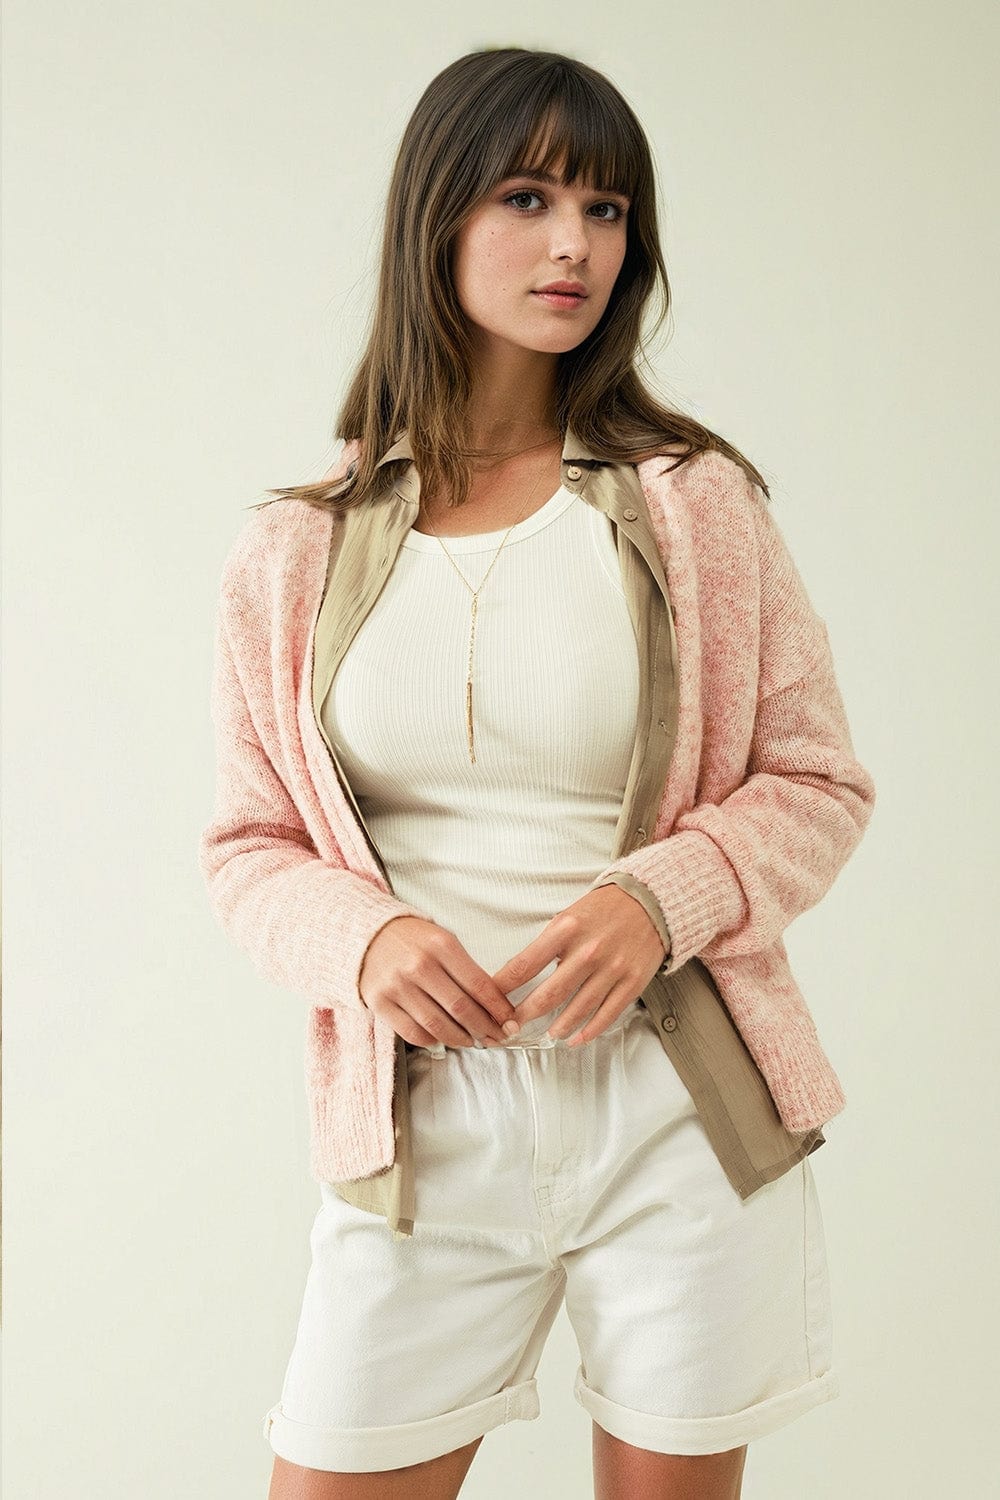 Q2 Women's Sweater Pink Knit Cardigan With Wide V-Neck And Button Closure